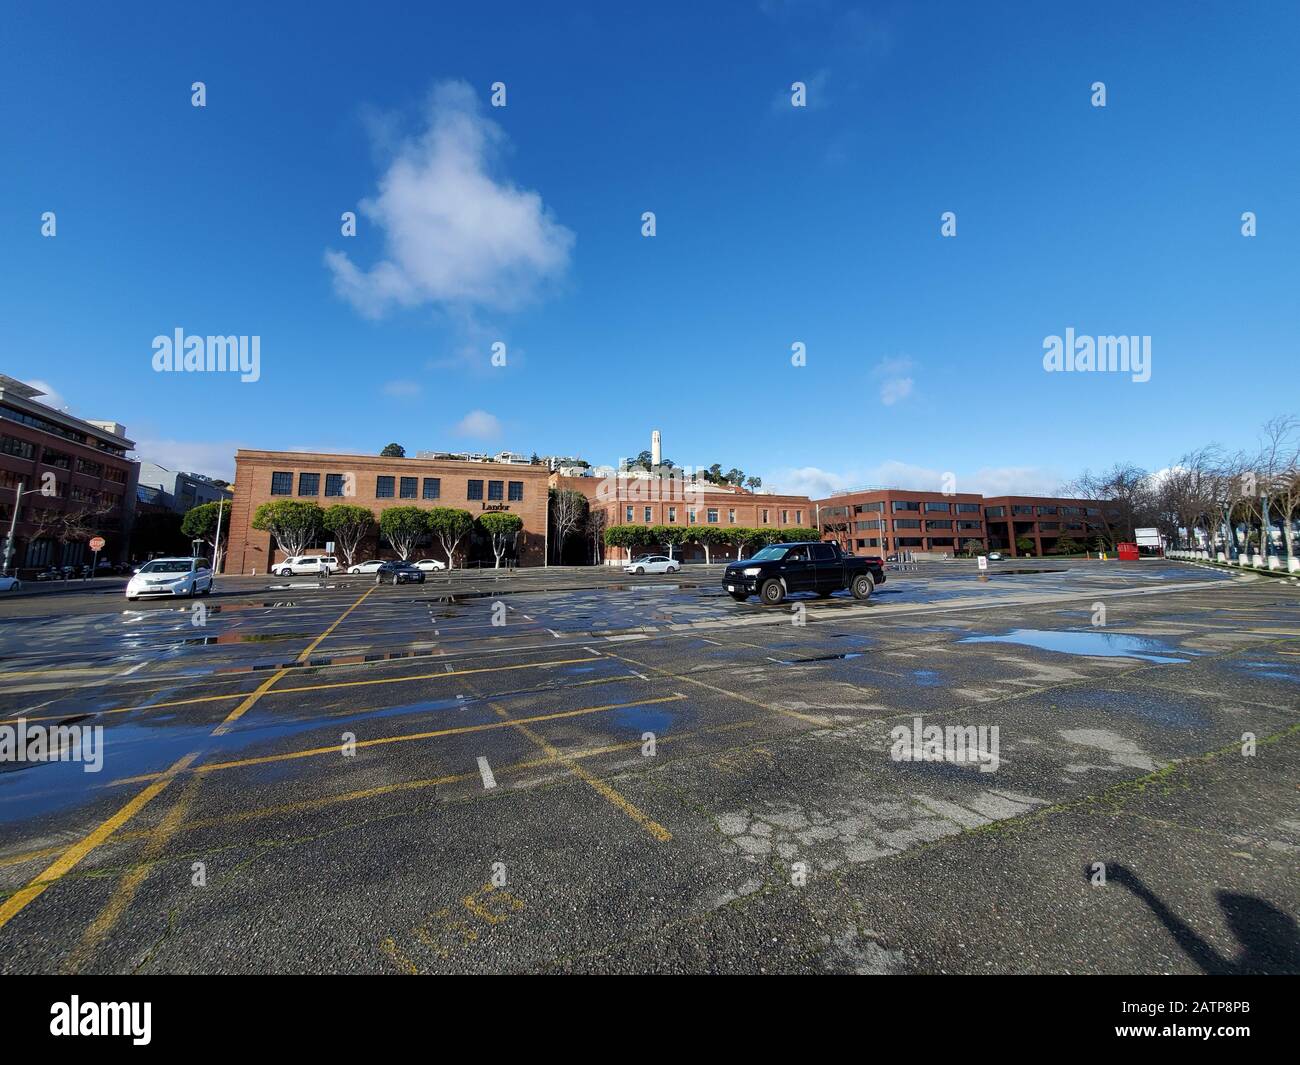 Wide angle of parking lots and businesses in the Embarcadero neighborhood of San Francisco, California, January 26, 2020. () Stock Photo